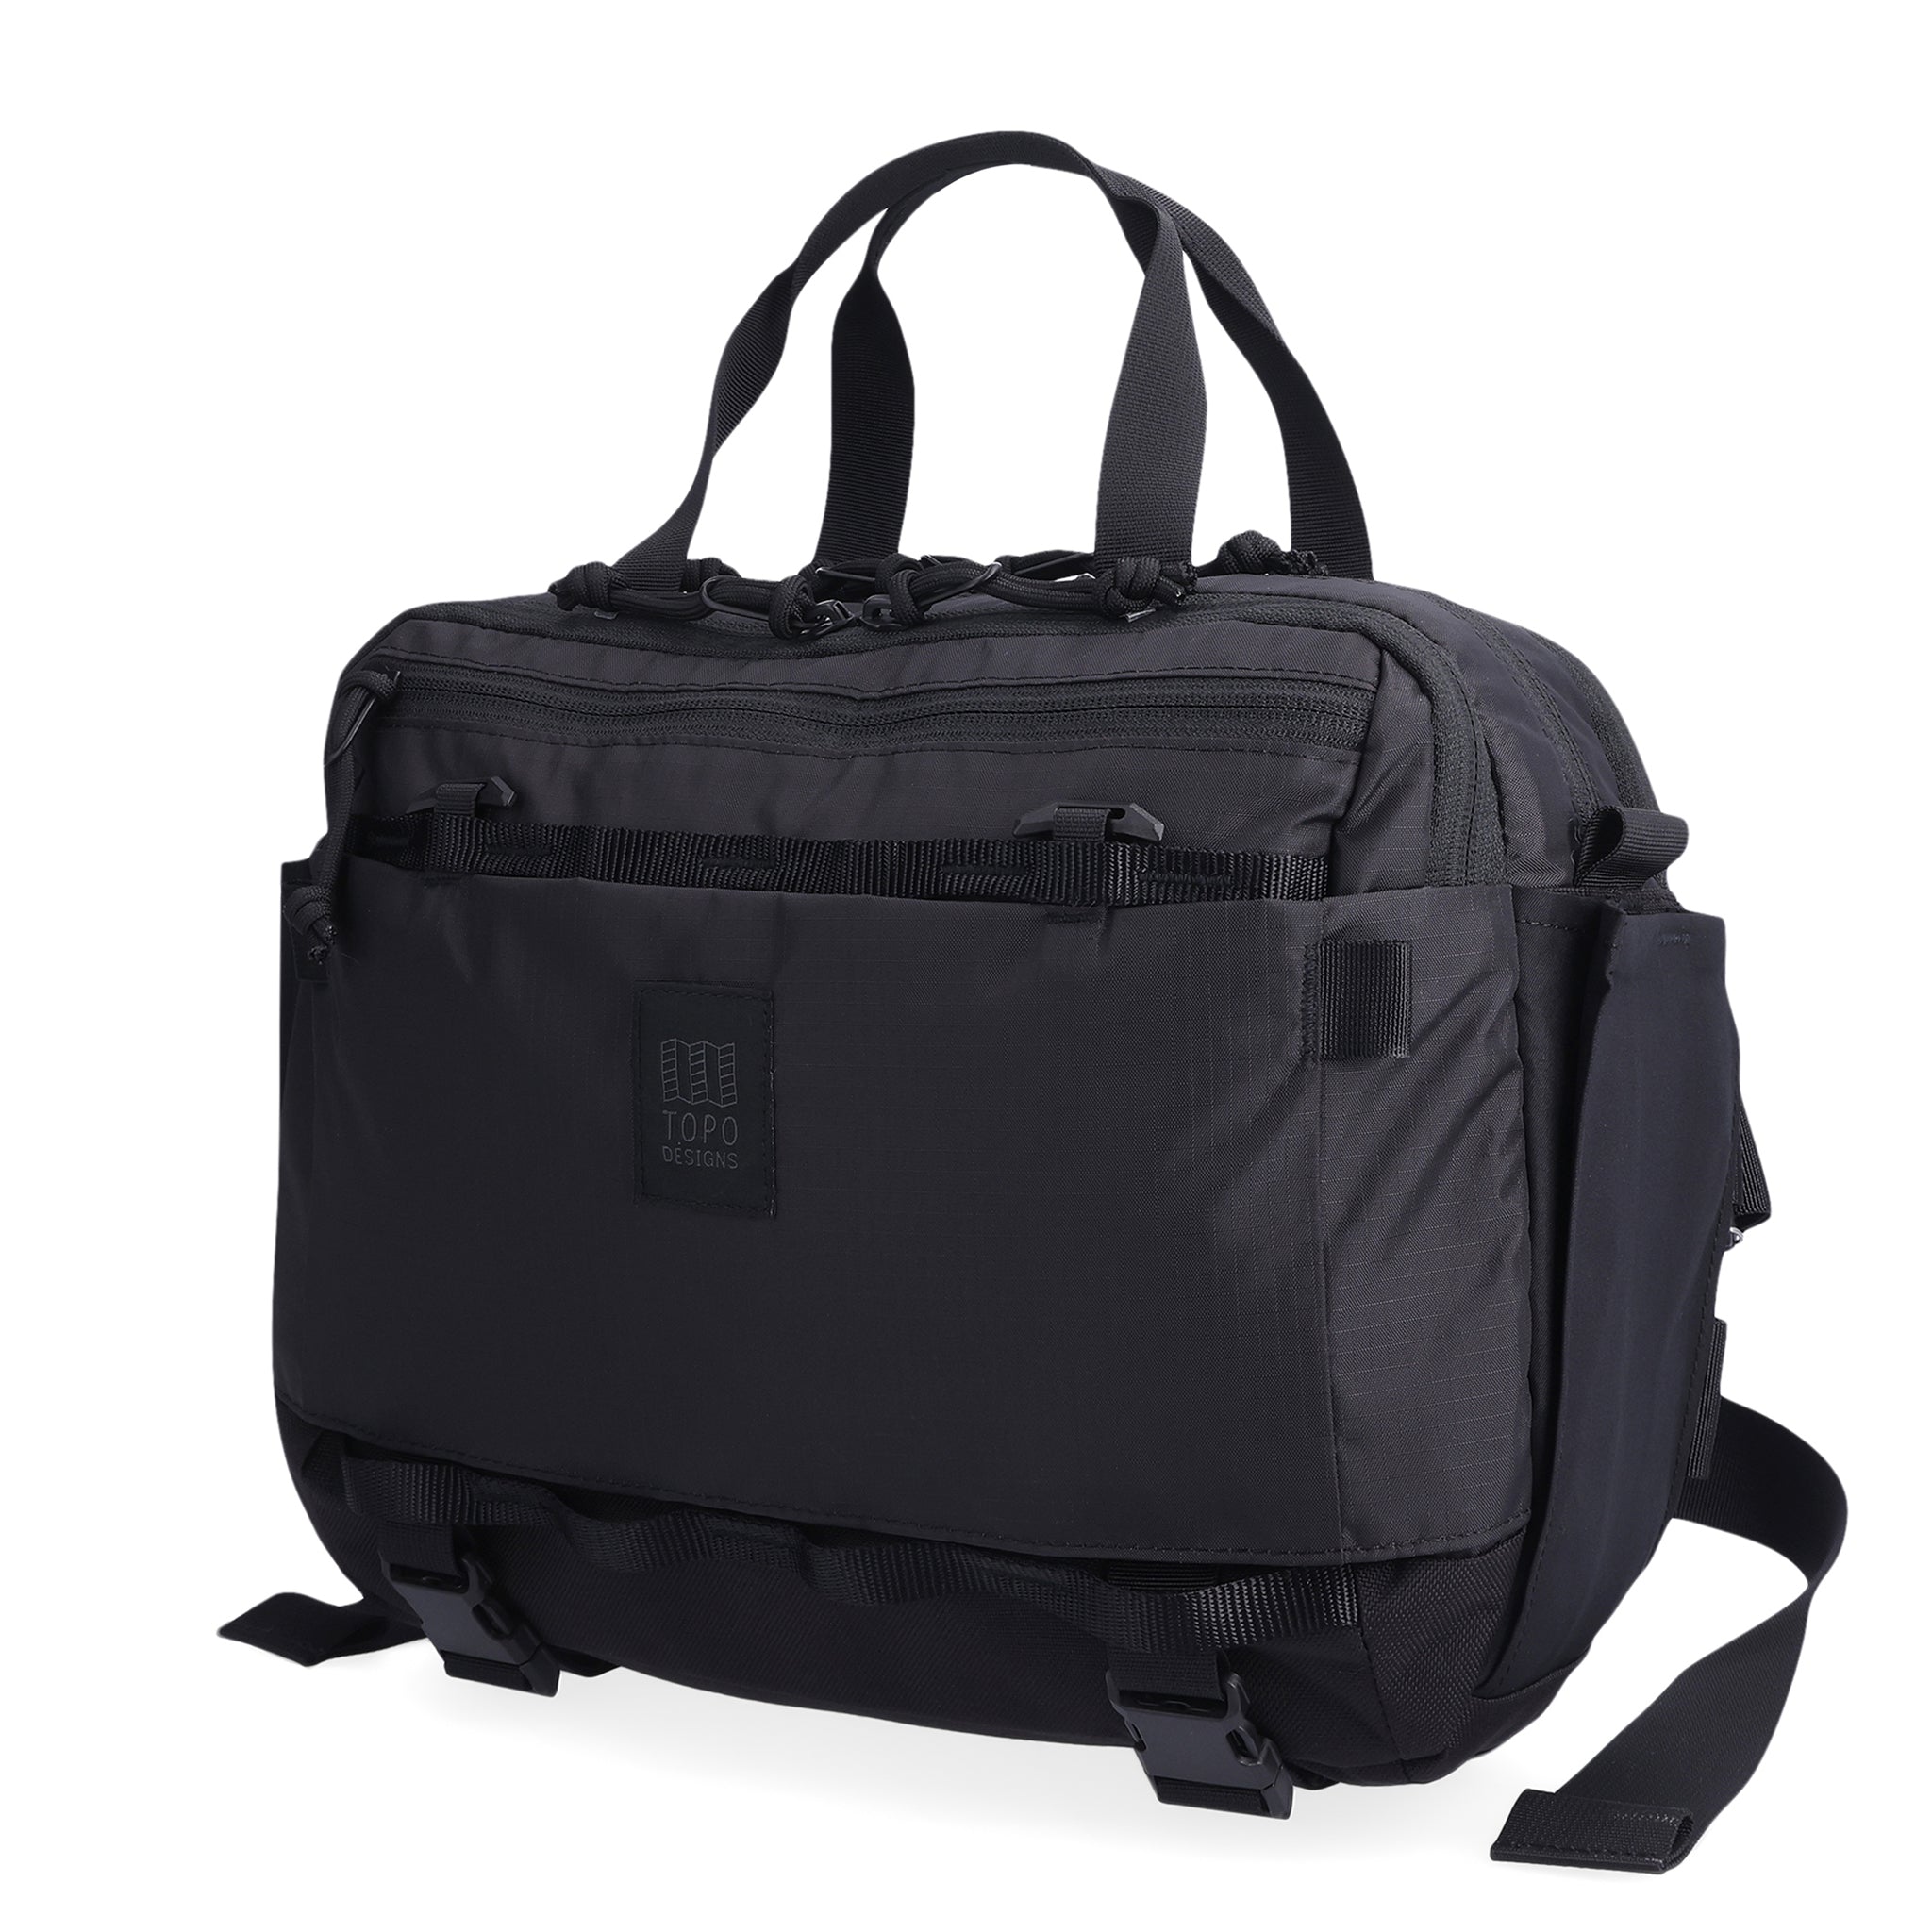 Side view of Topo Designs Mountain Cross Bag in recycled "Black" nylon.